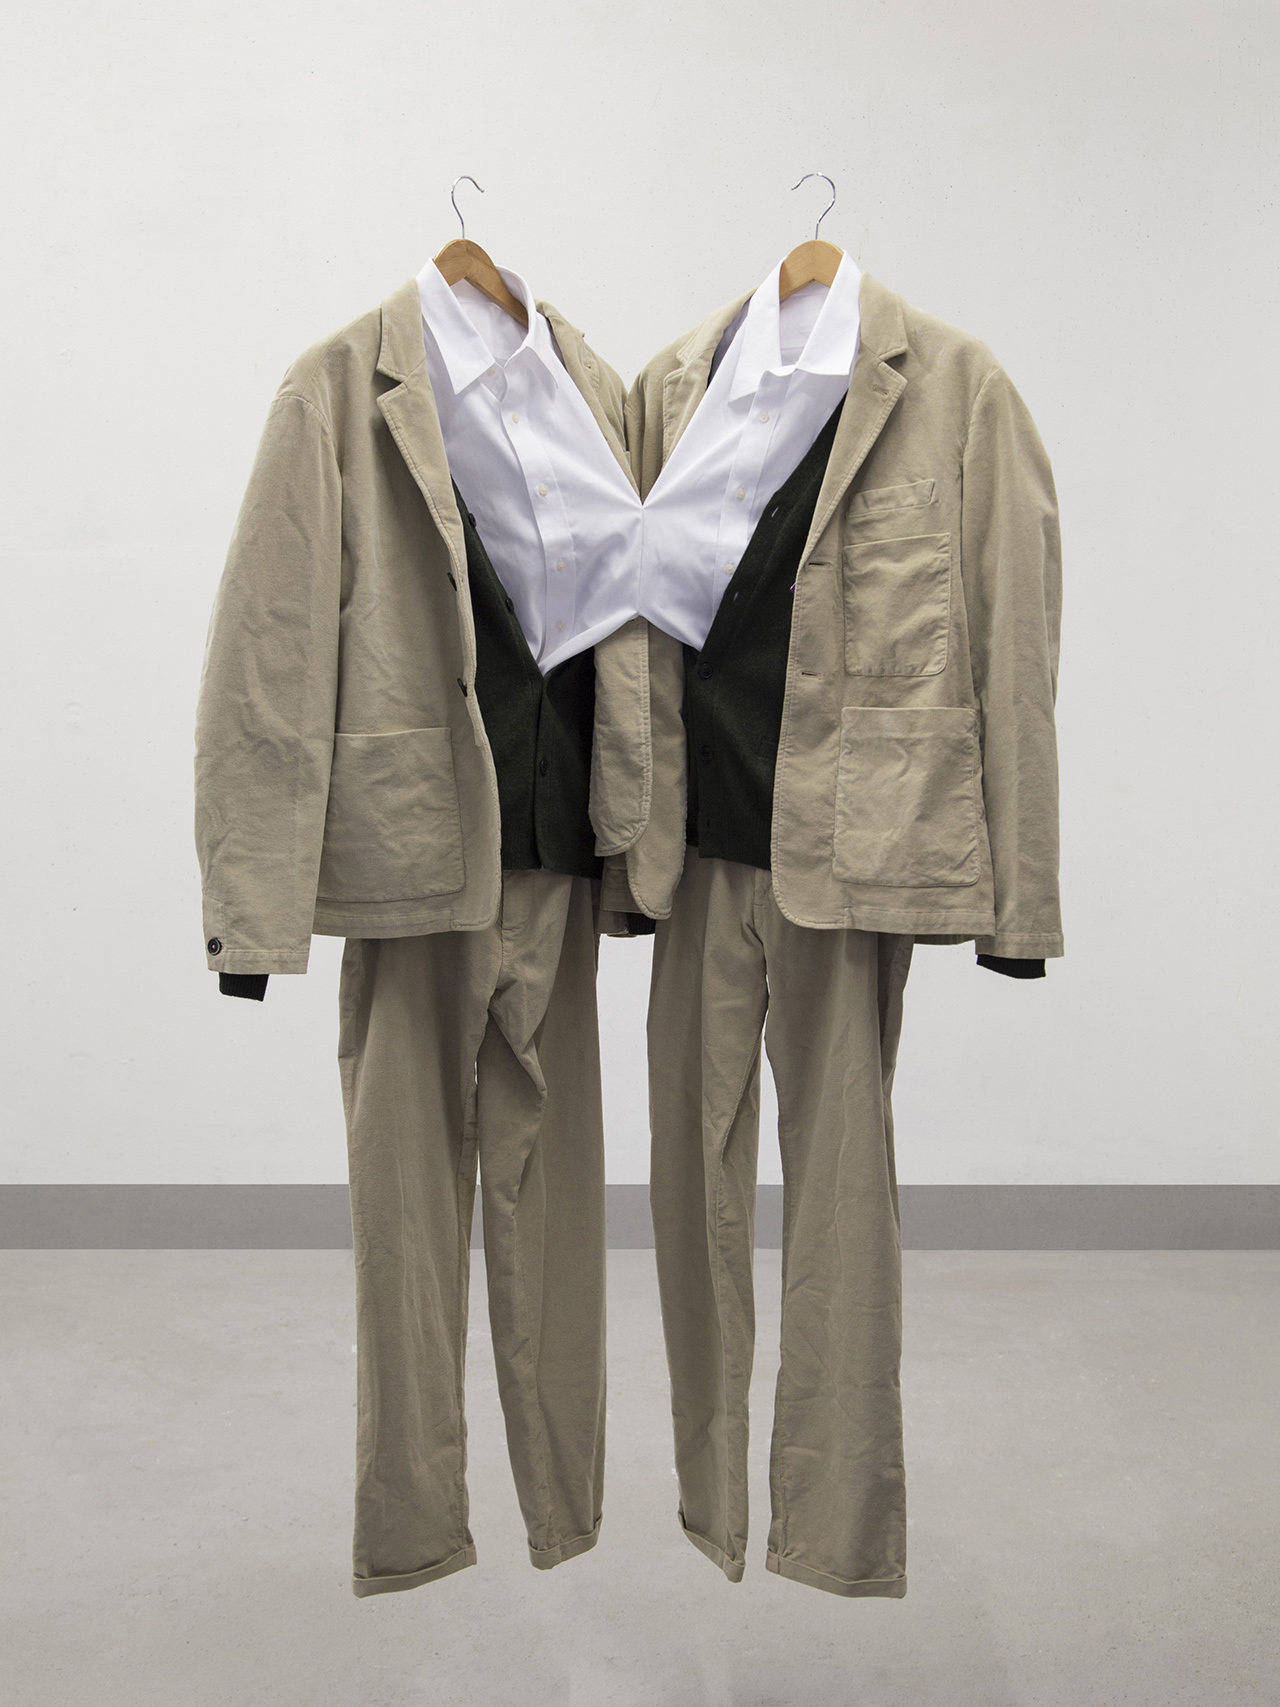 Michael and Chiyan Ho, Death Won't Do Us Apart, 2018, two suites, one joint shirt, dimension variable